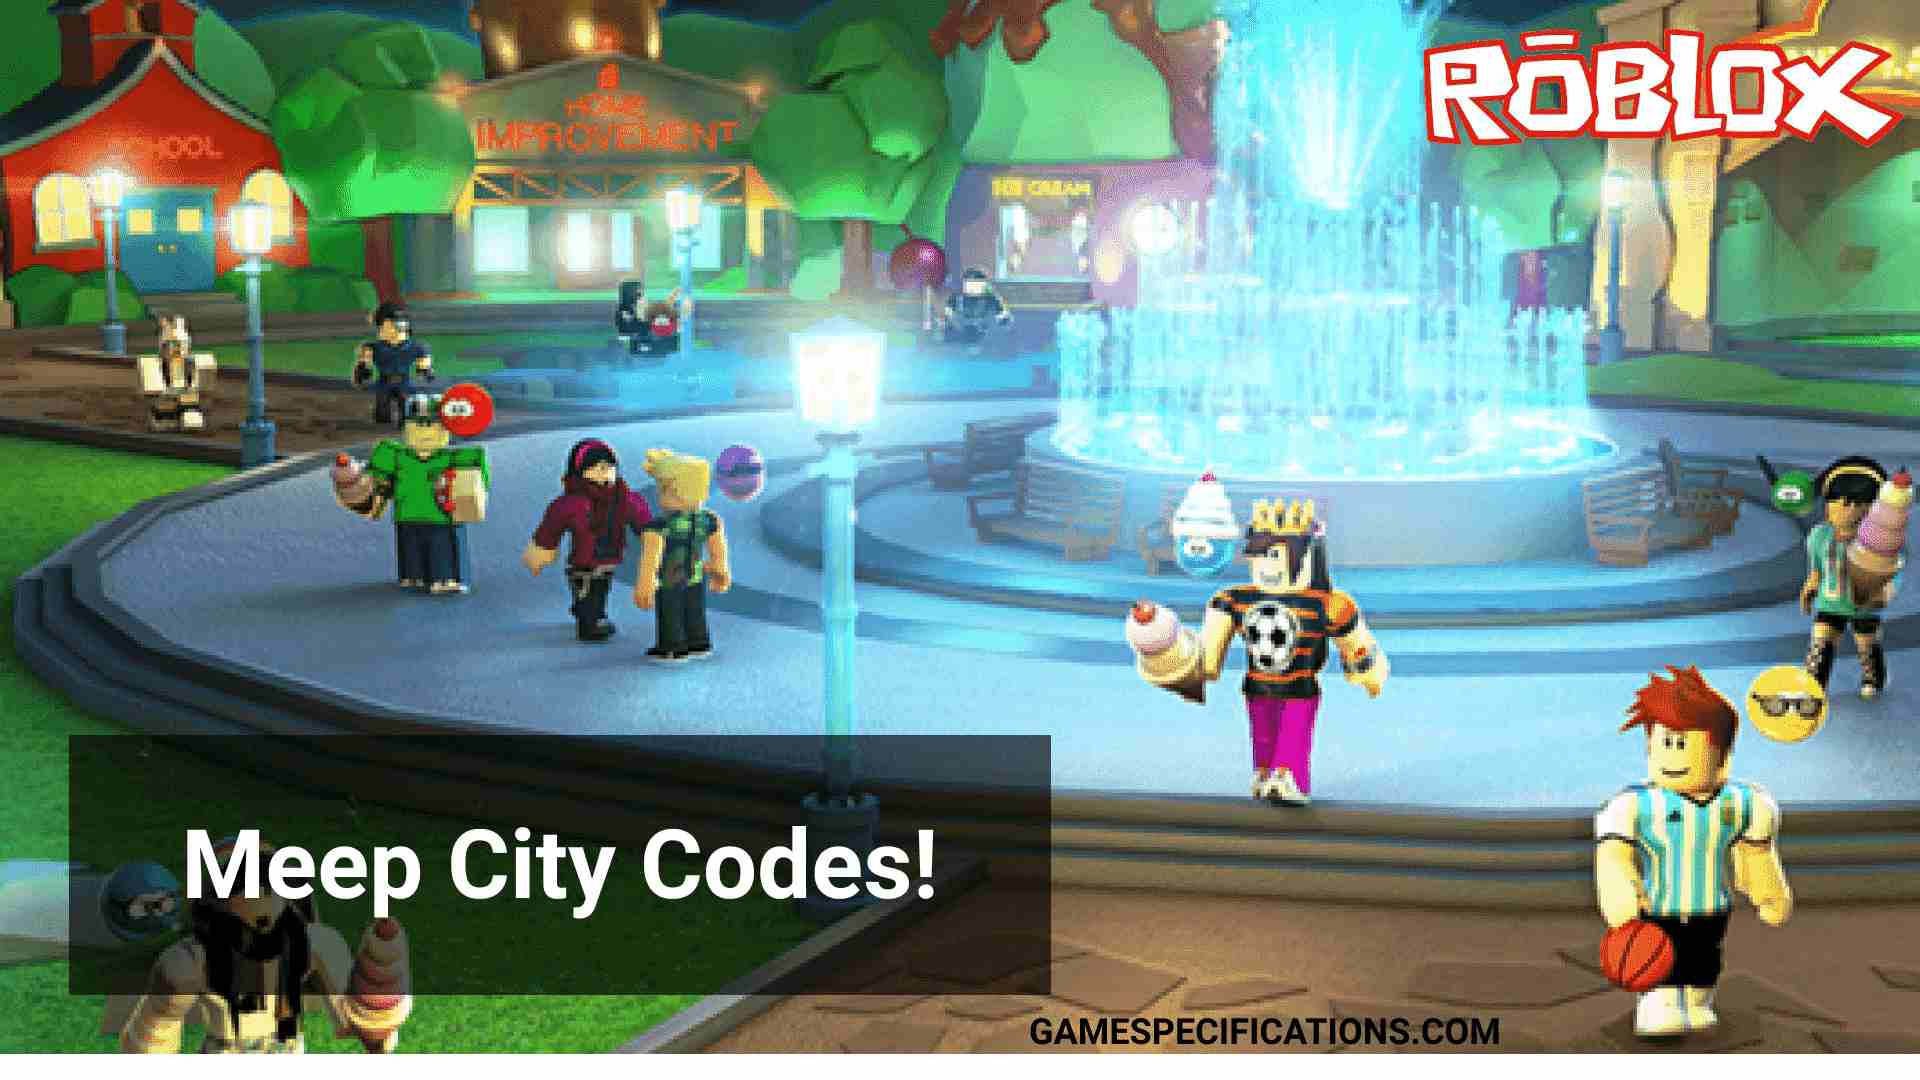 Roblox Archives Game Specifications - codes to get free robux on meep city